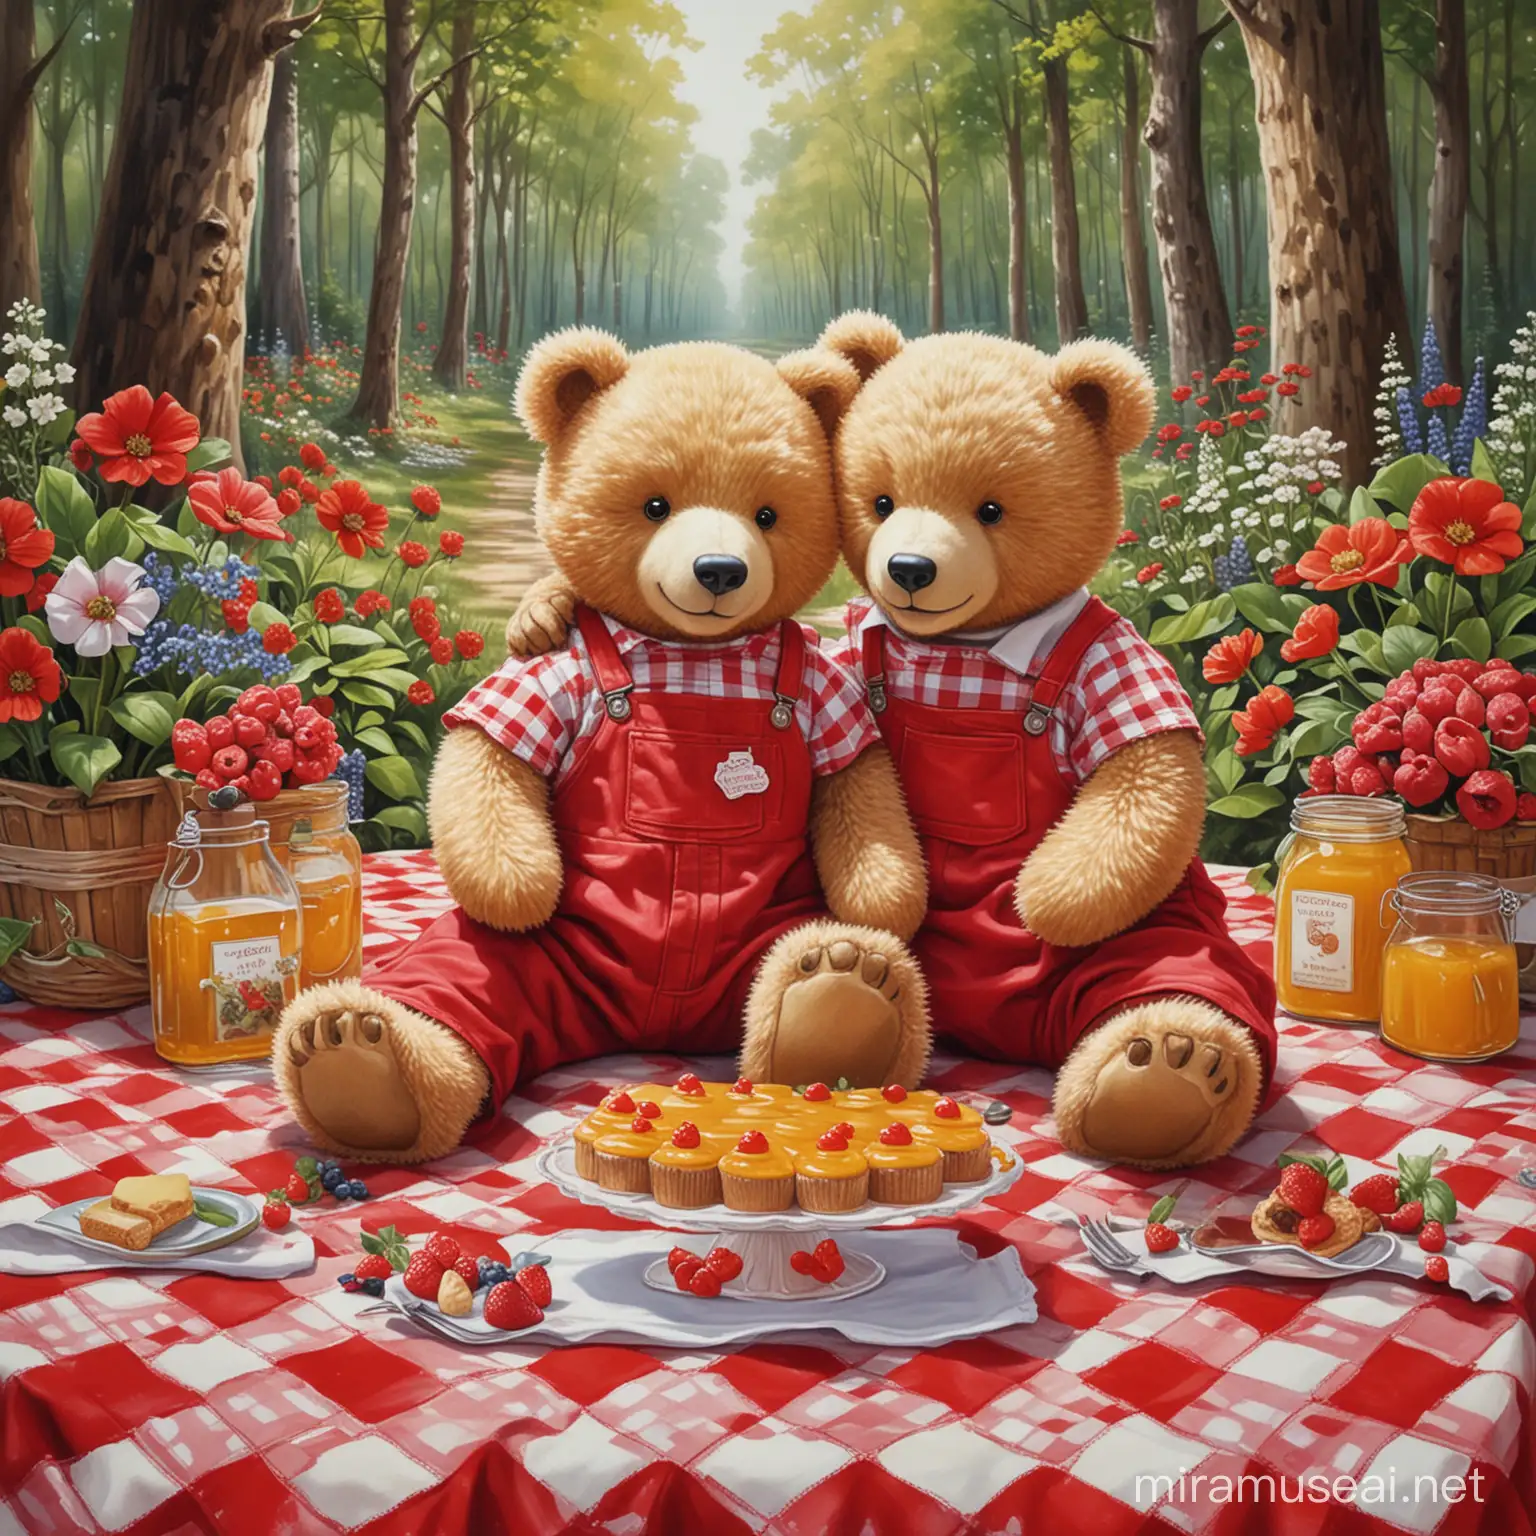 Whimsical art Two teddy bears wearing red overalls, sitting on a red and white checkered tablecloth, with cakes, bottles of juice, jars of honey and fruit, in a forest full of flowers and leafy trees.